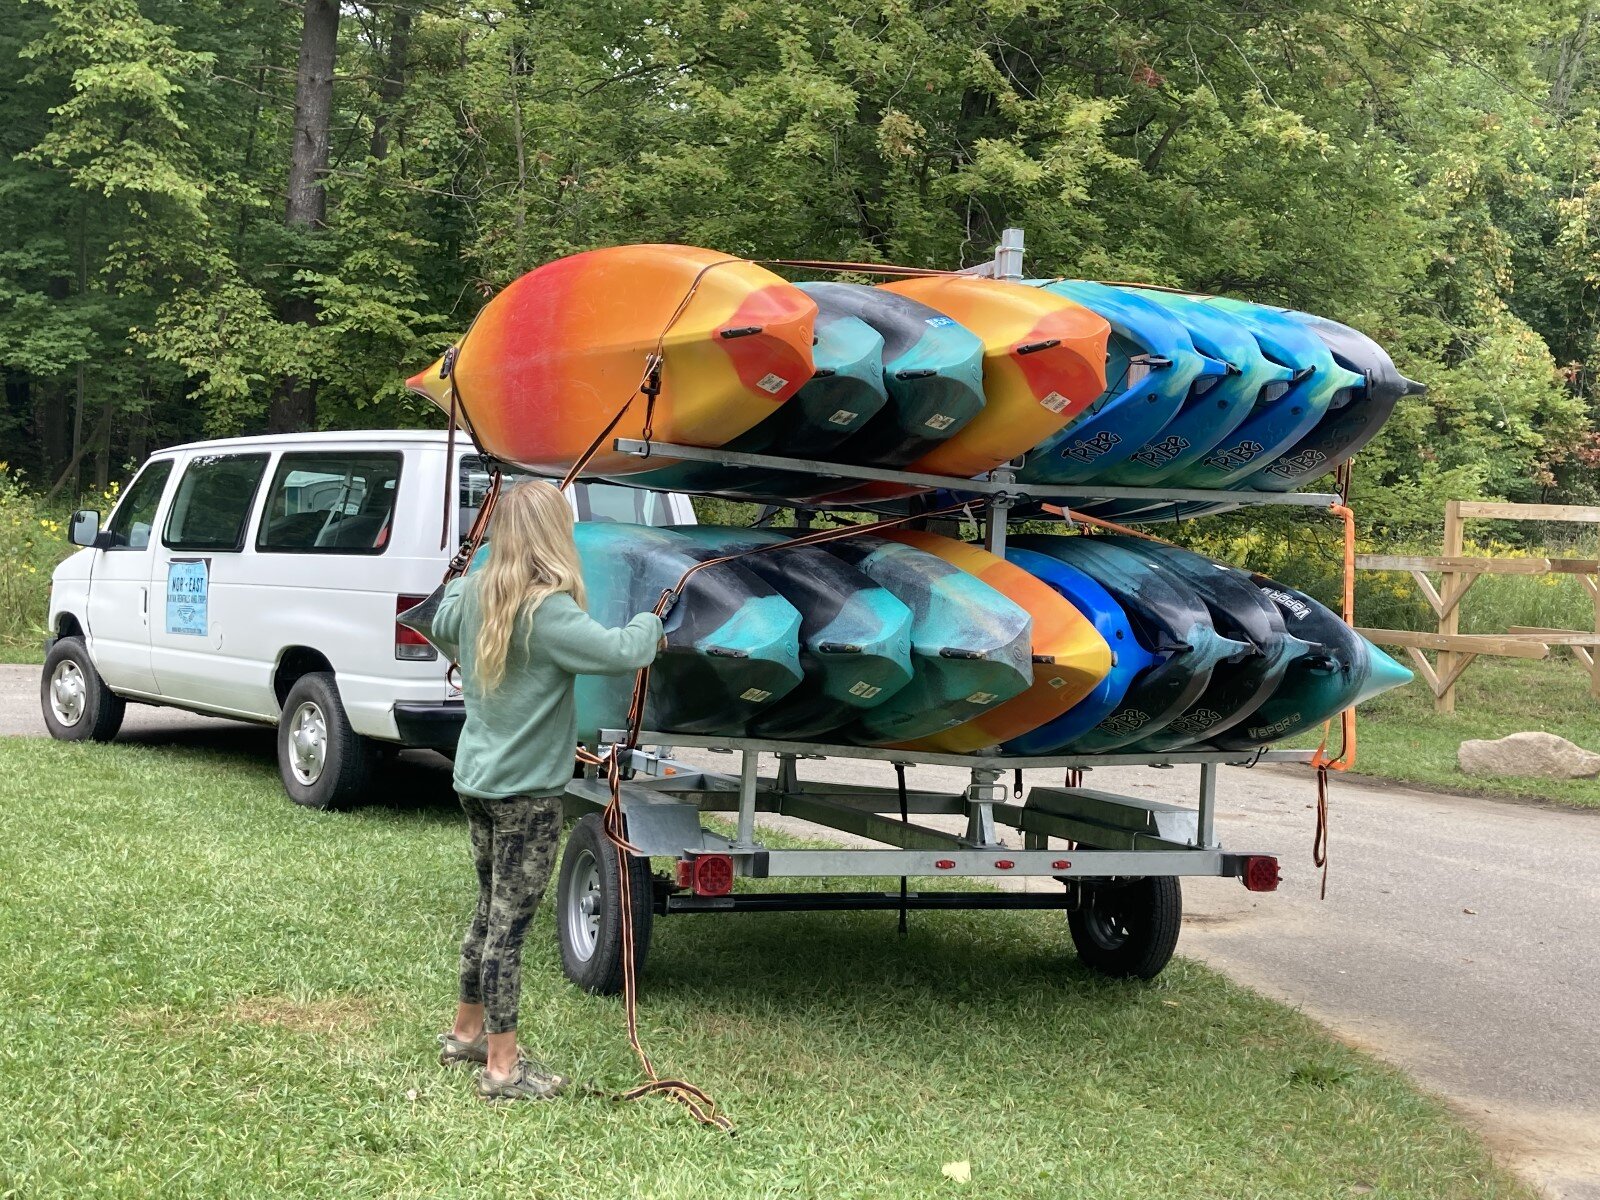 MYPros crowdfunding recipient Nor'East Outdoors trailer full of kayaks